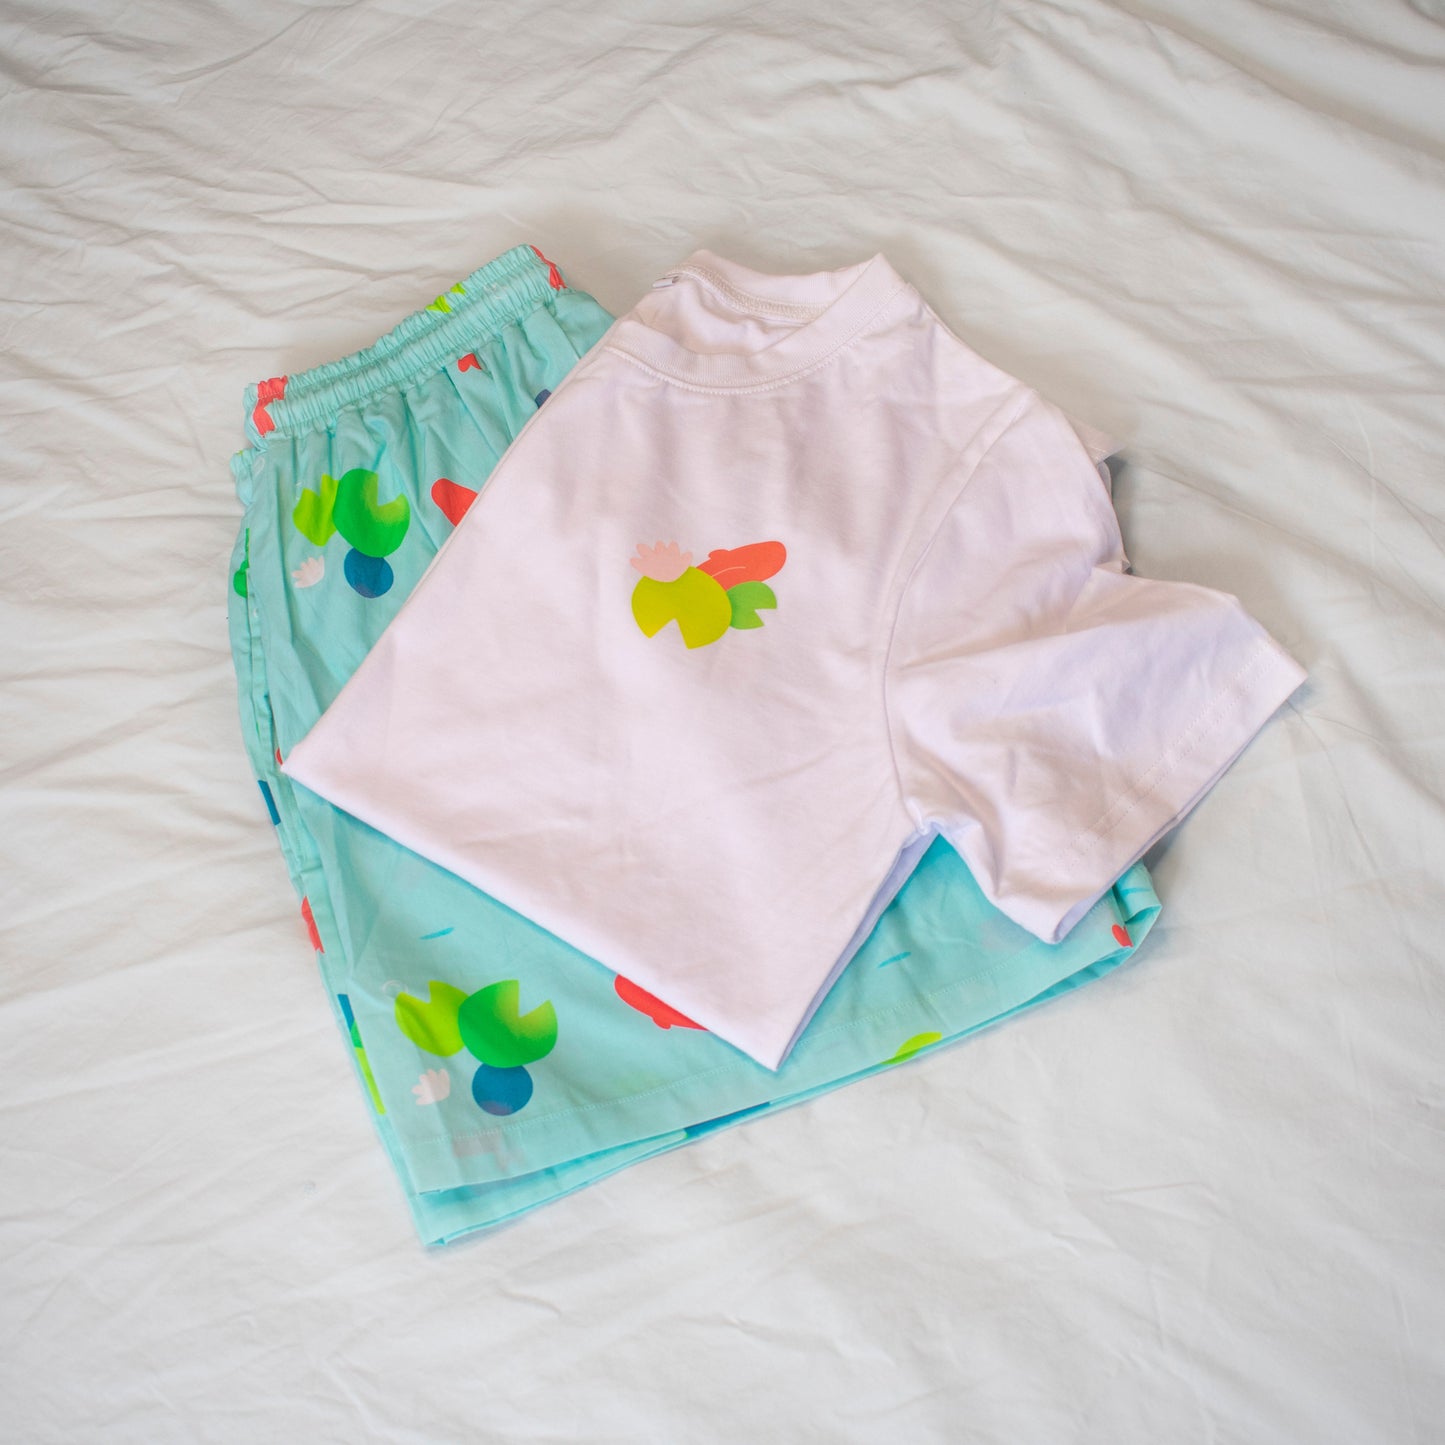 [SOLD OUT] Fishpond Pyjamas top